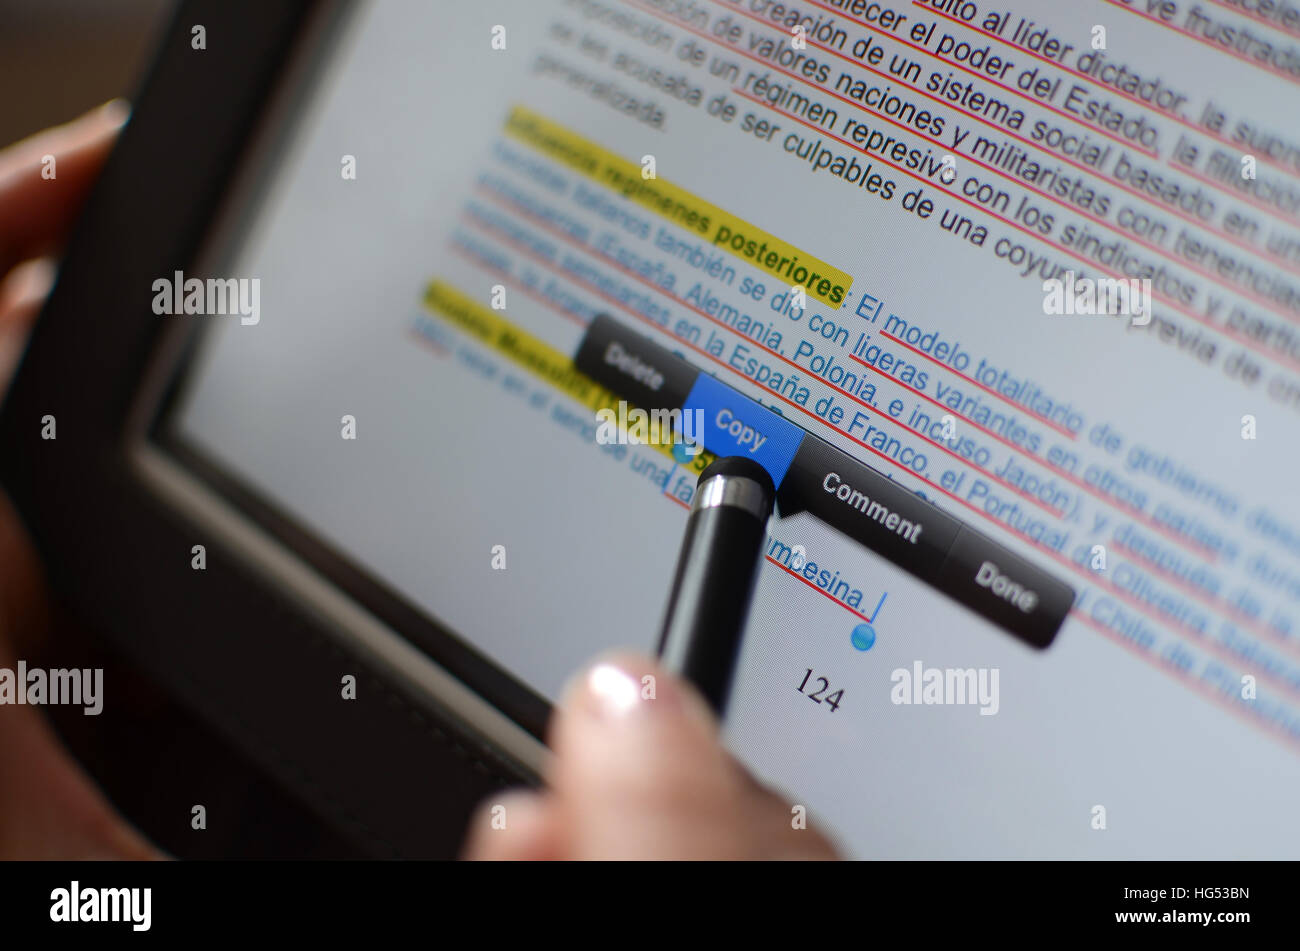 College student using an iPad and a marker Stock Photo